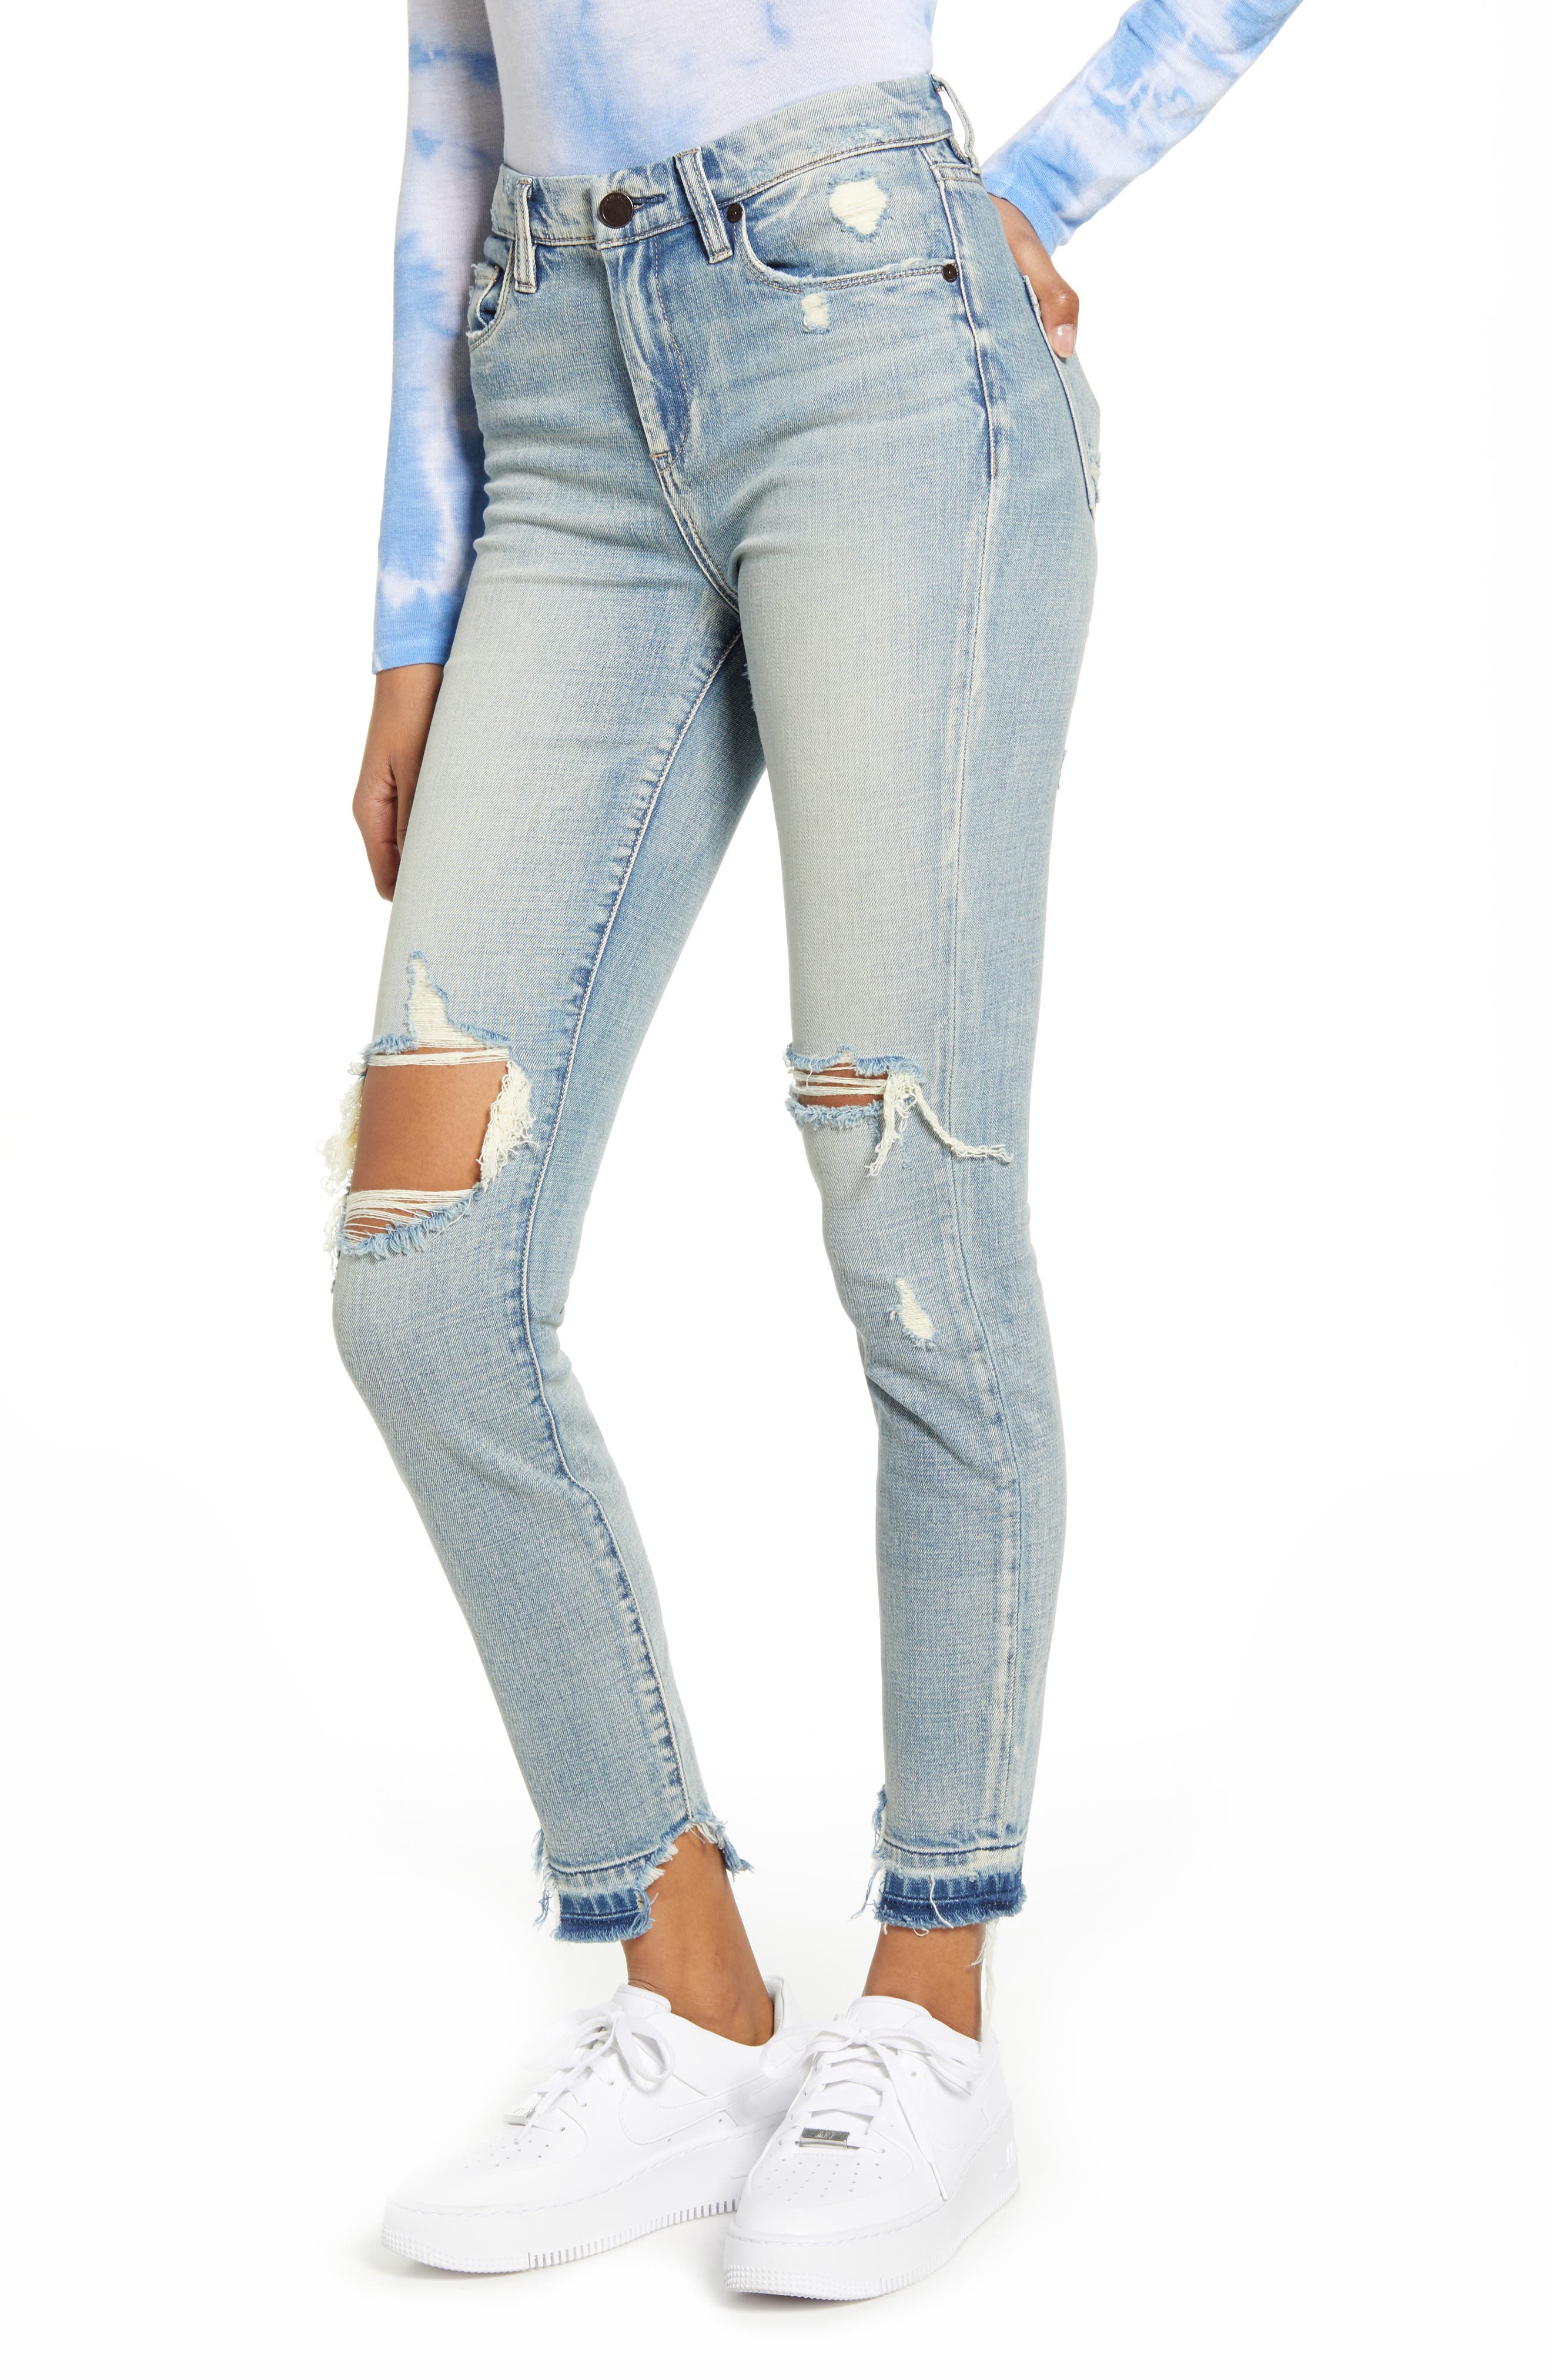 white ripped skinny jeans womens